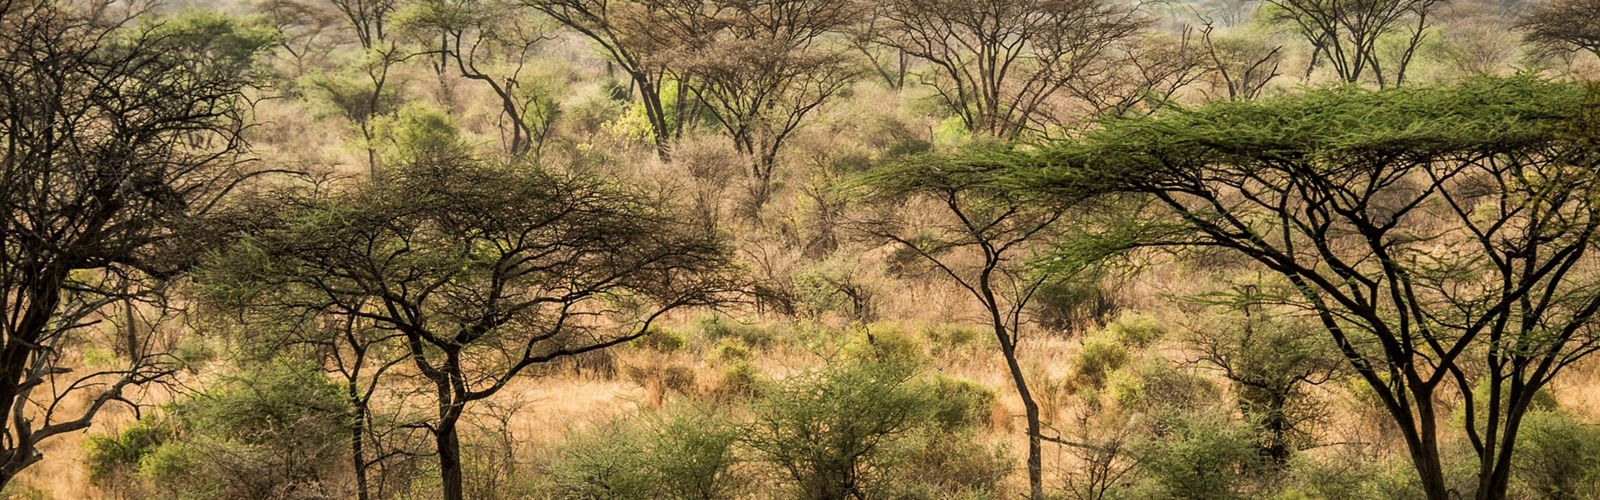 small acacia trees dot a grassland landscape, forming a pattern of trees in greens and browns